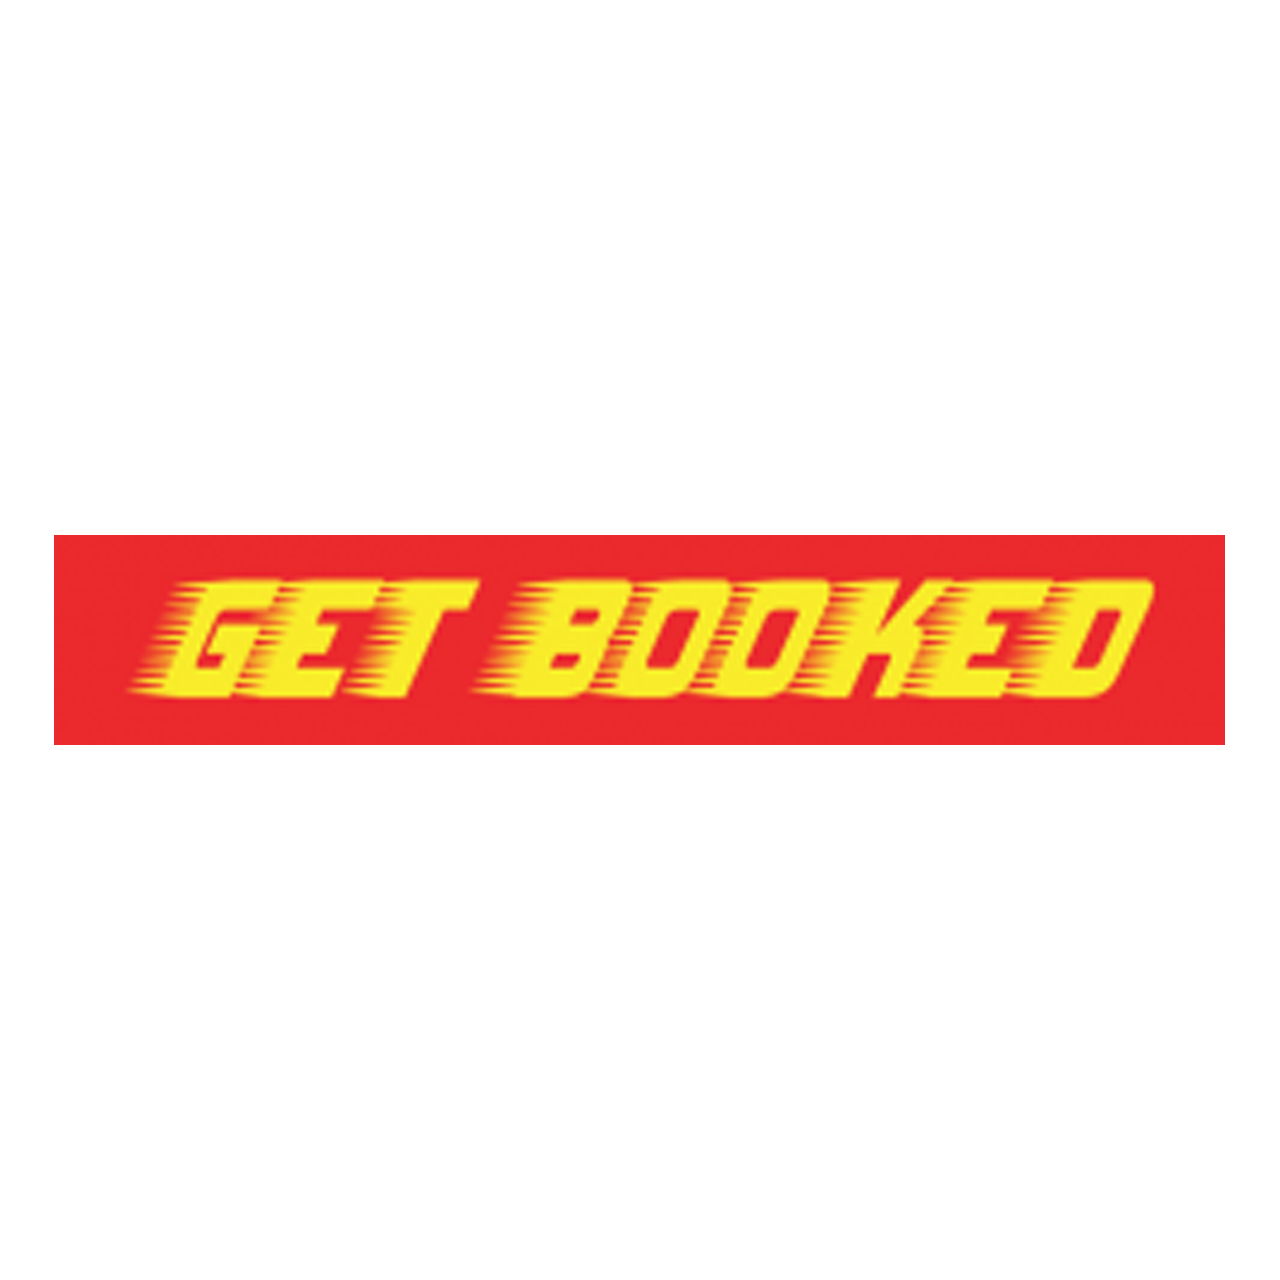 Get Booked